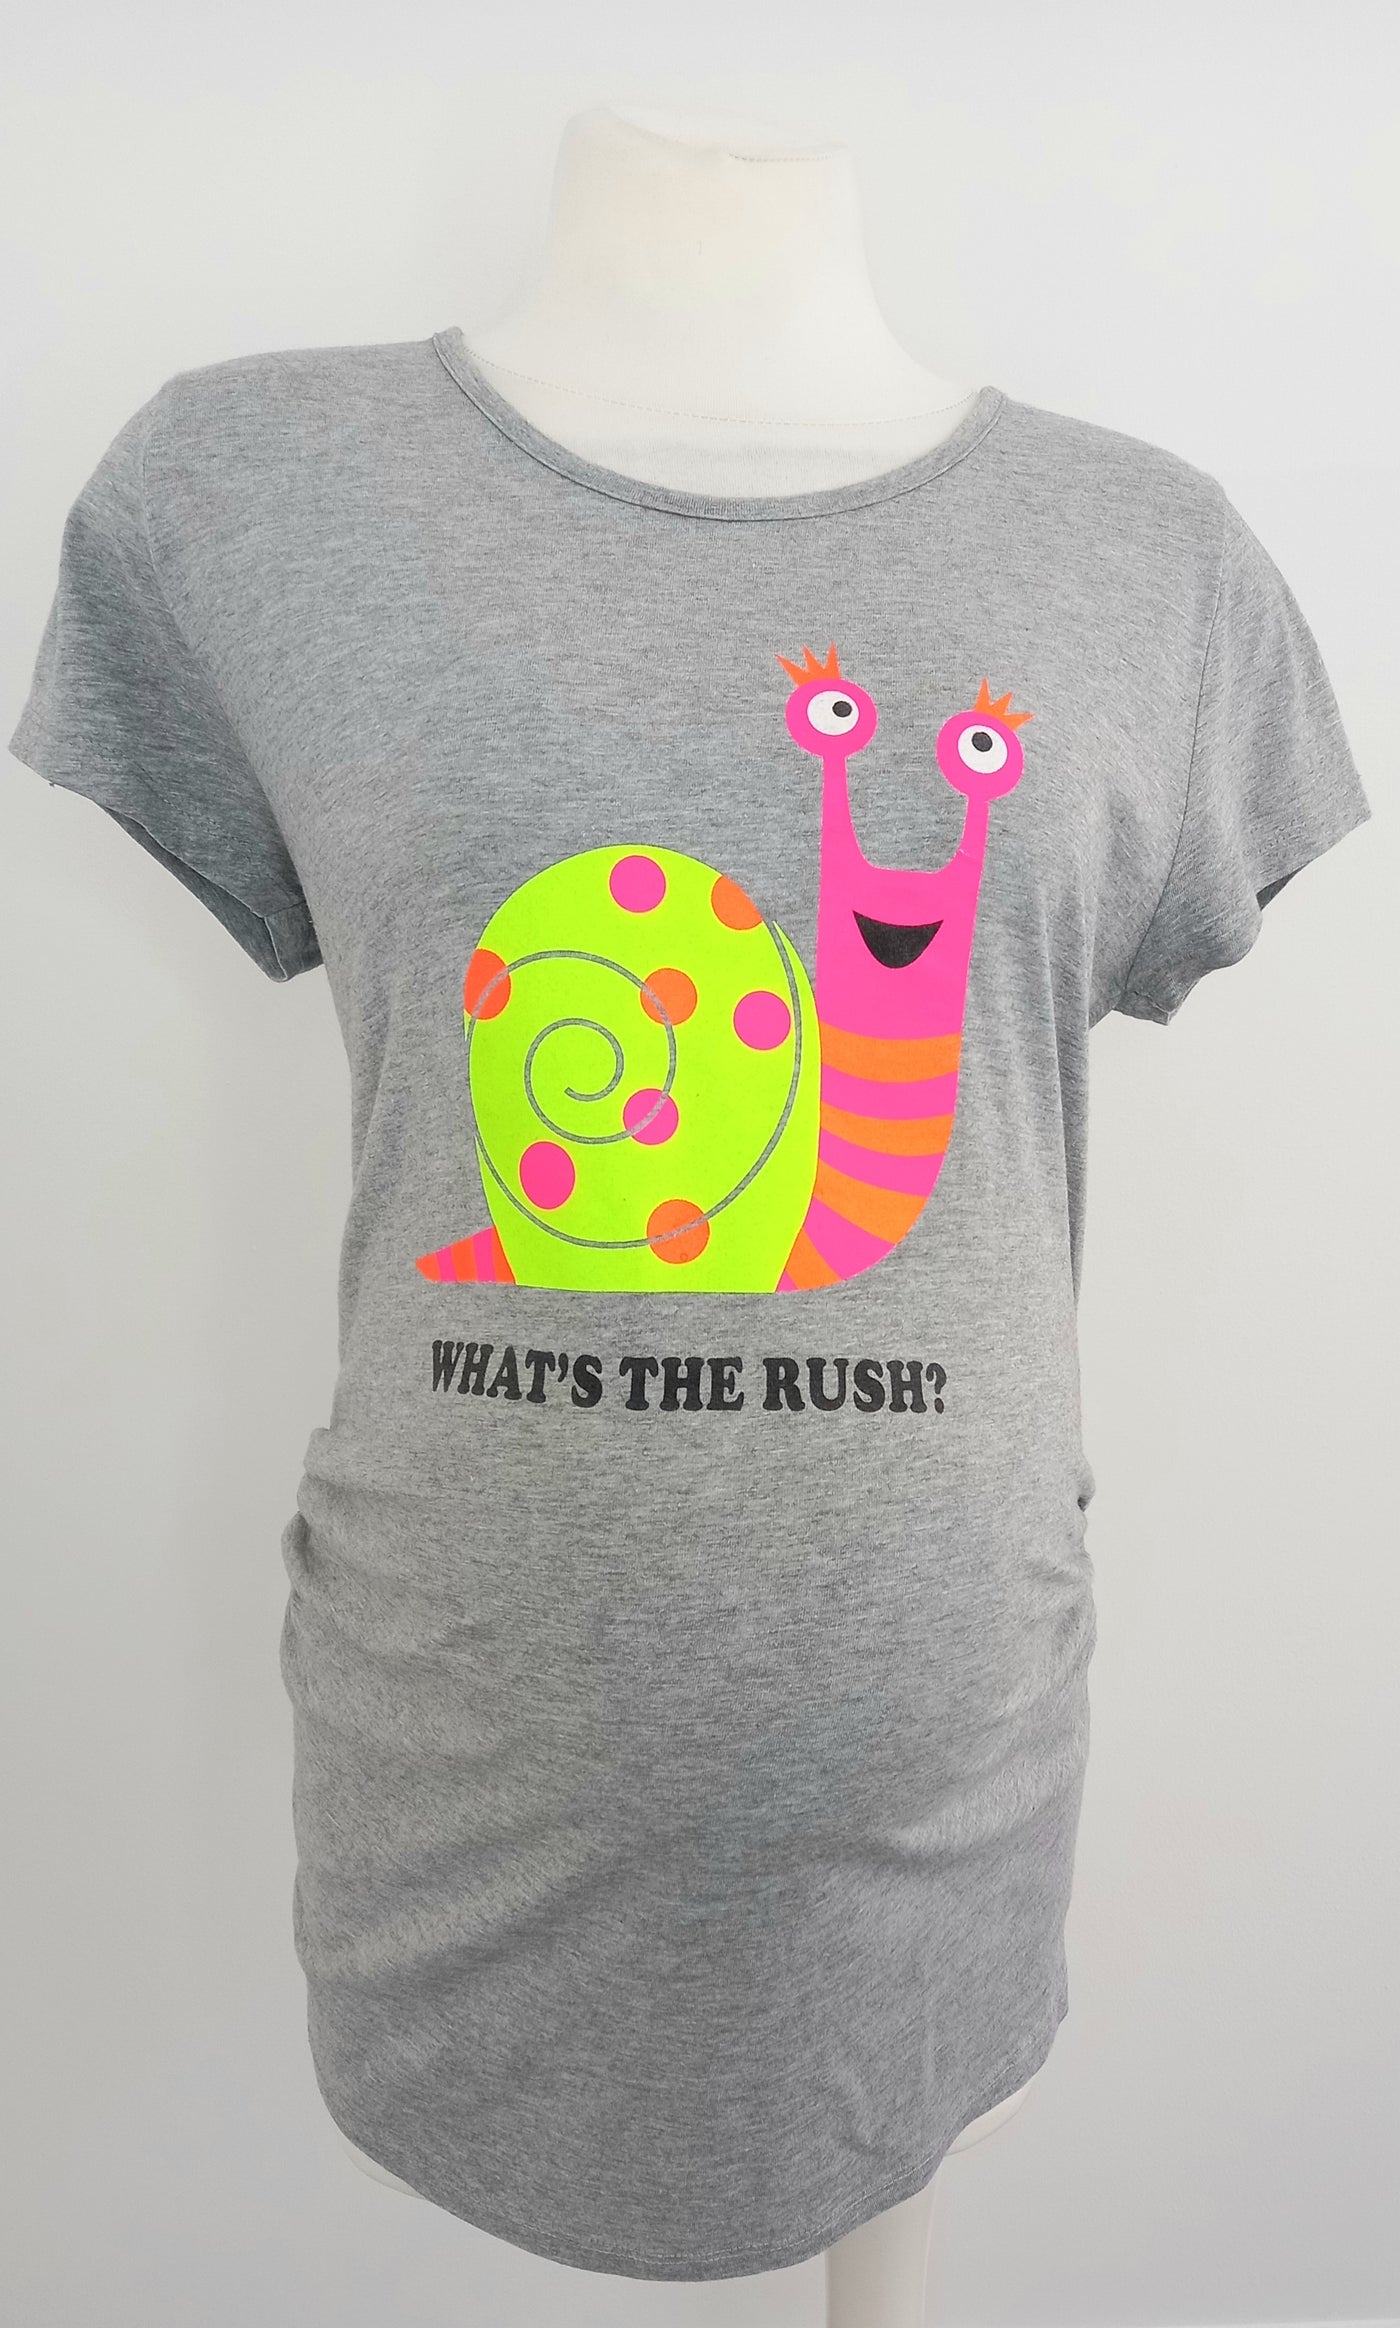 New Look Maternity Grey 'What's The Rush' T-Shirt - Size 16 (more like size 12/14)